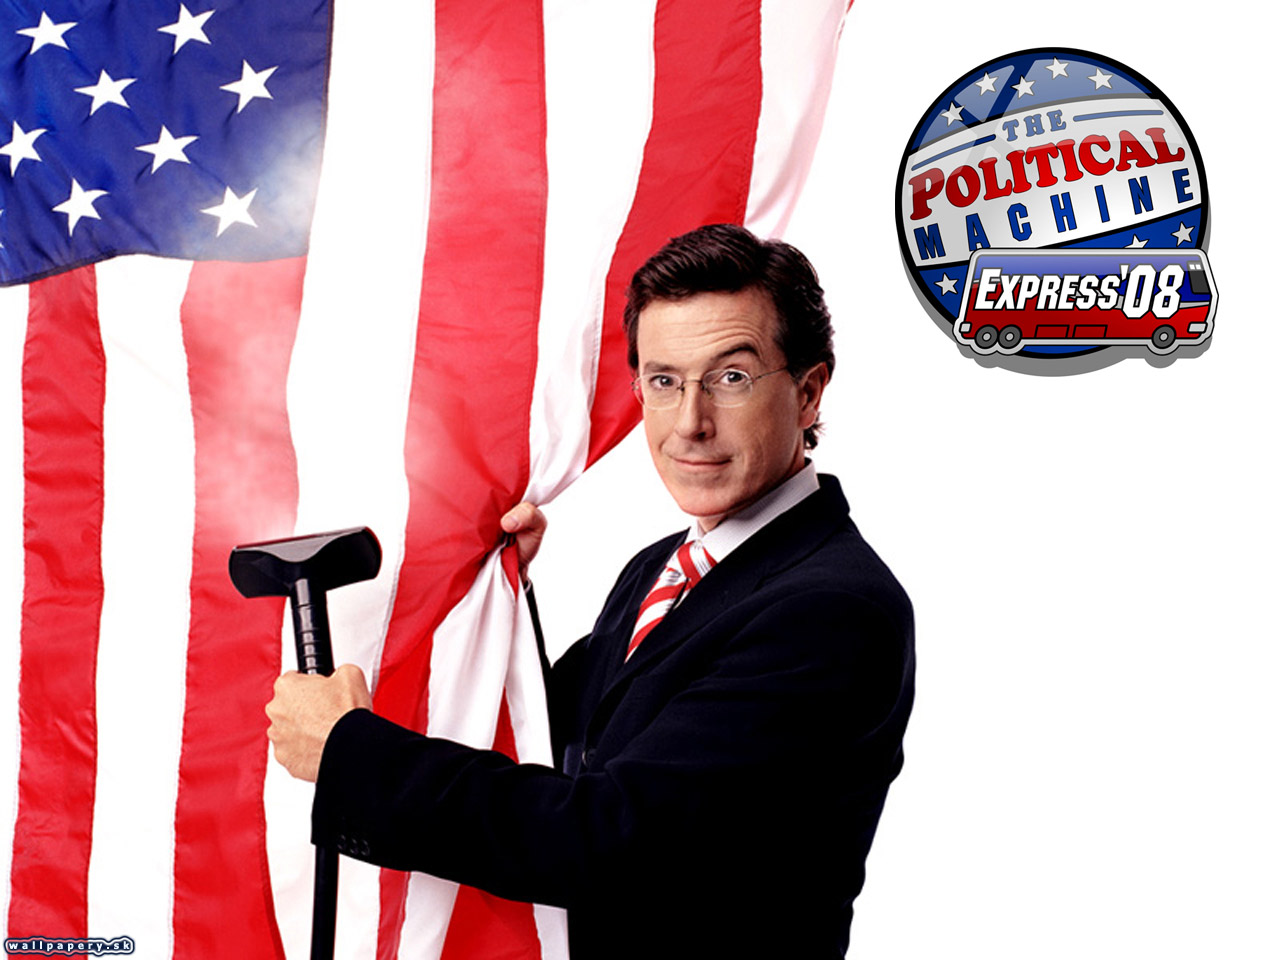 The Political Machine 2008 Express Edition - wallpaper 2